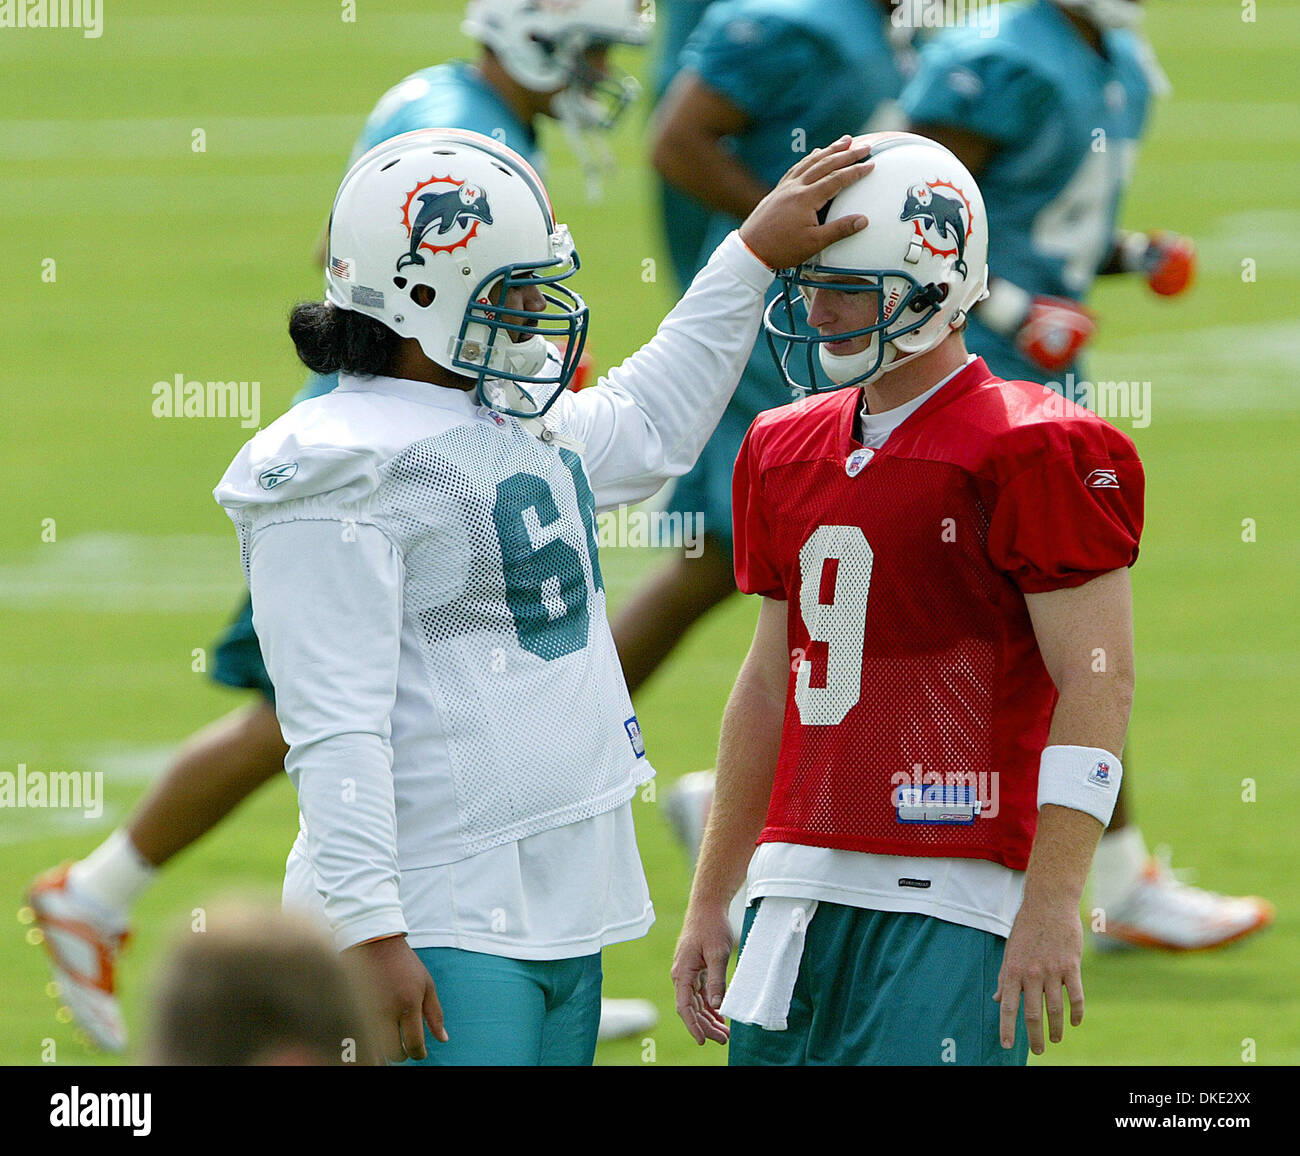 Jul 24, 2007 - Davie, FL, USA - Rookie quarterback JOHN BECK, right, is greeted by teammate SAMSON SATELE, during Dolphins rookie camp Tueday in Davie.  (Credit Image: © Bill Ingram/Palm Beach Post/ZUMA Press) RESTRICTIONS: USA Tabloid RIGHTS OUT! Stock Photo